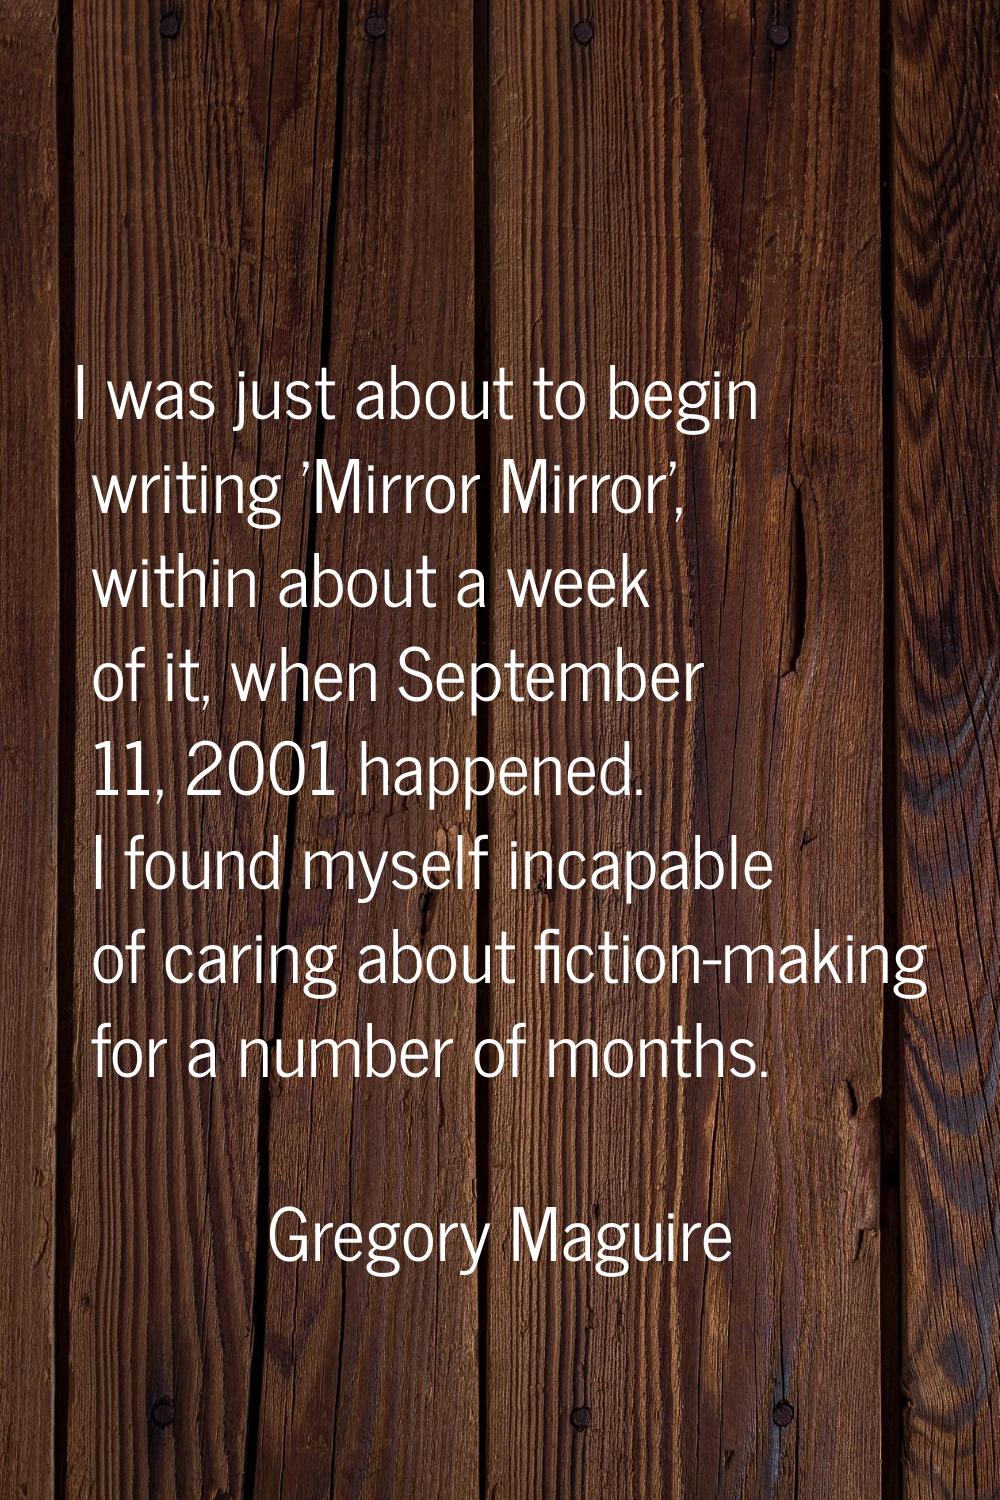 I was just about to begin writing 'Mirror Mirror', within about a week of it, when September 11, 20